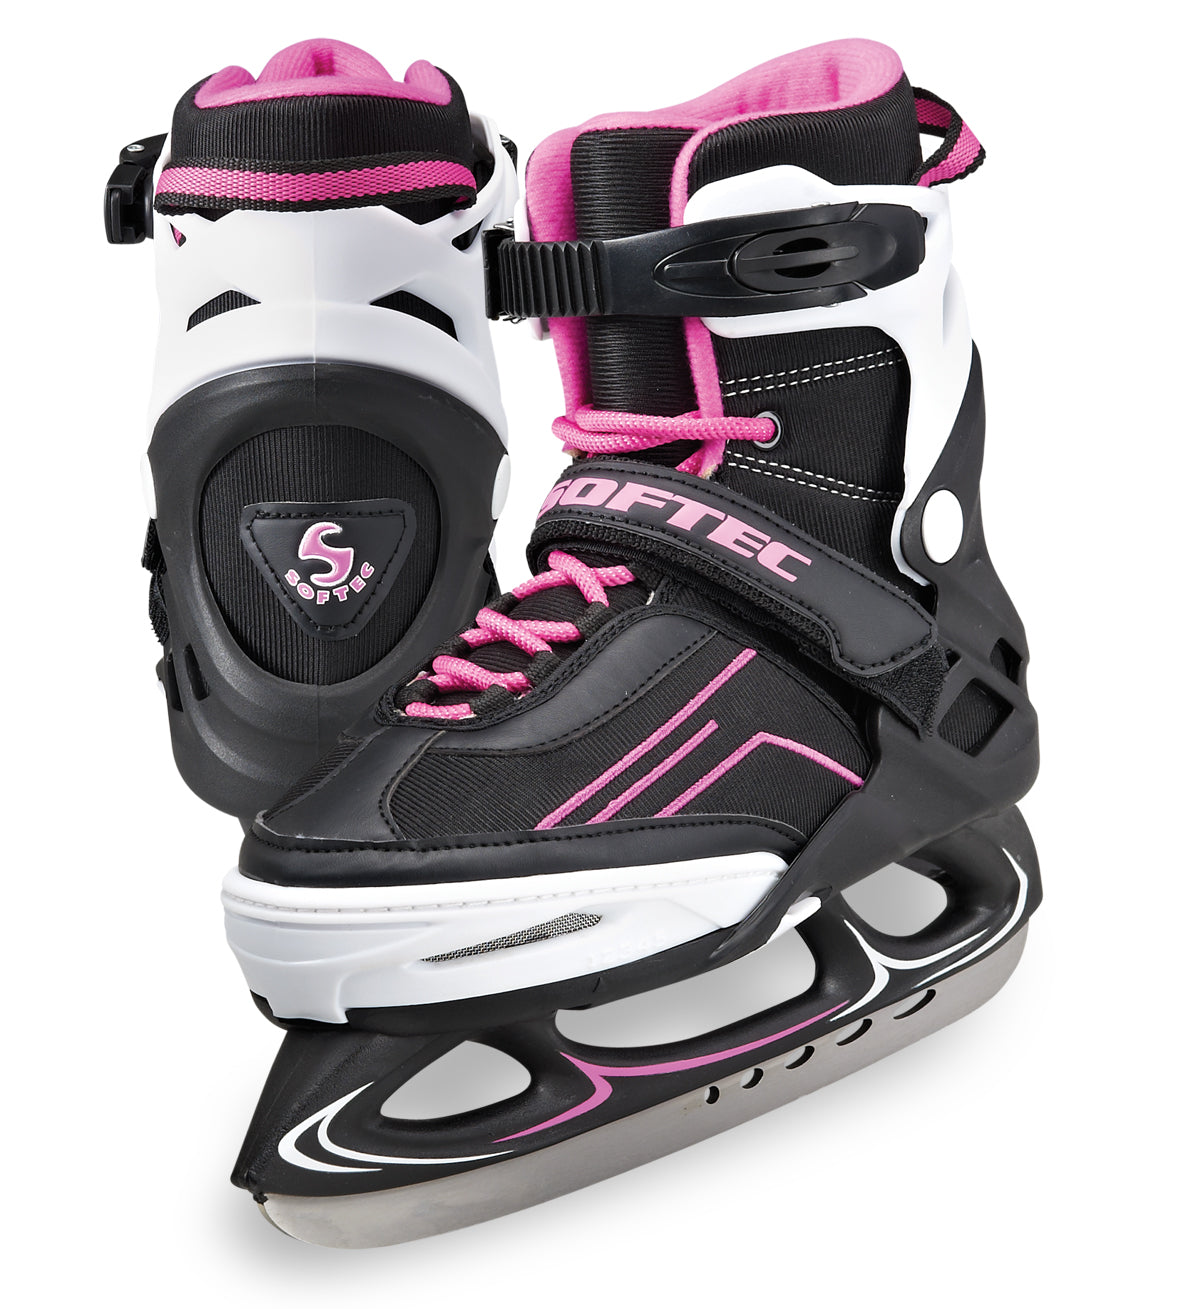 SOFTEC VIBE ADJUSTABLE SKATE (ADULT/YOUTH) XP1000